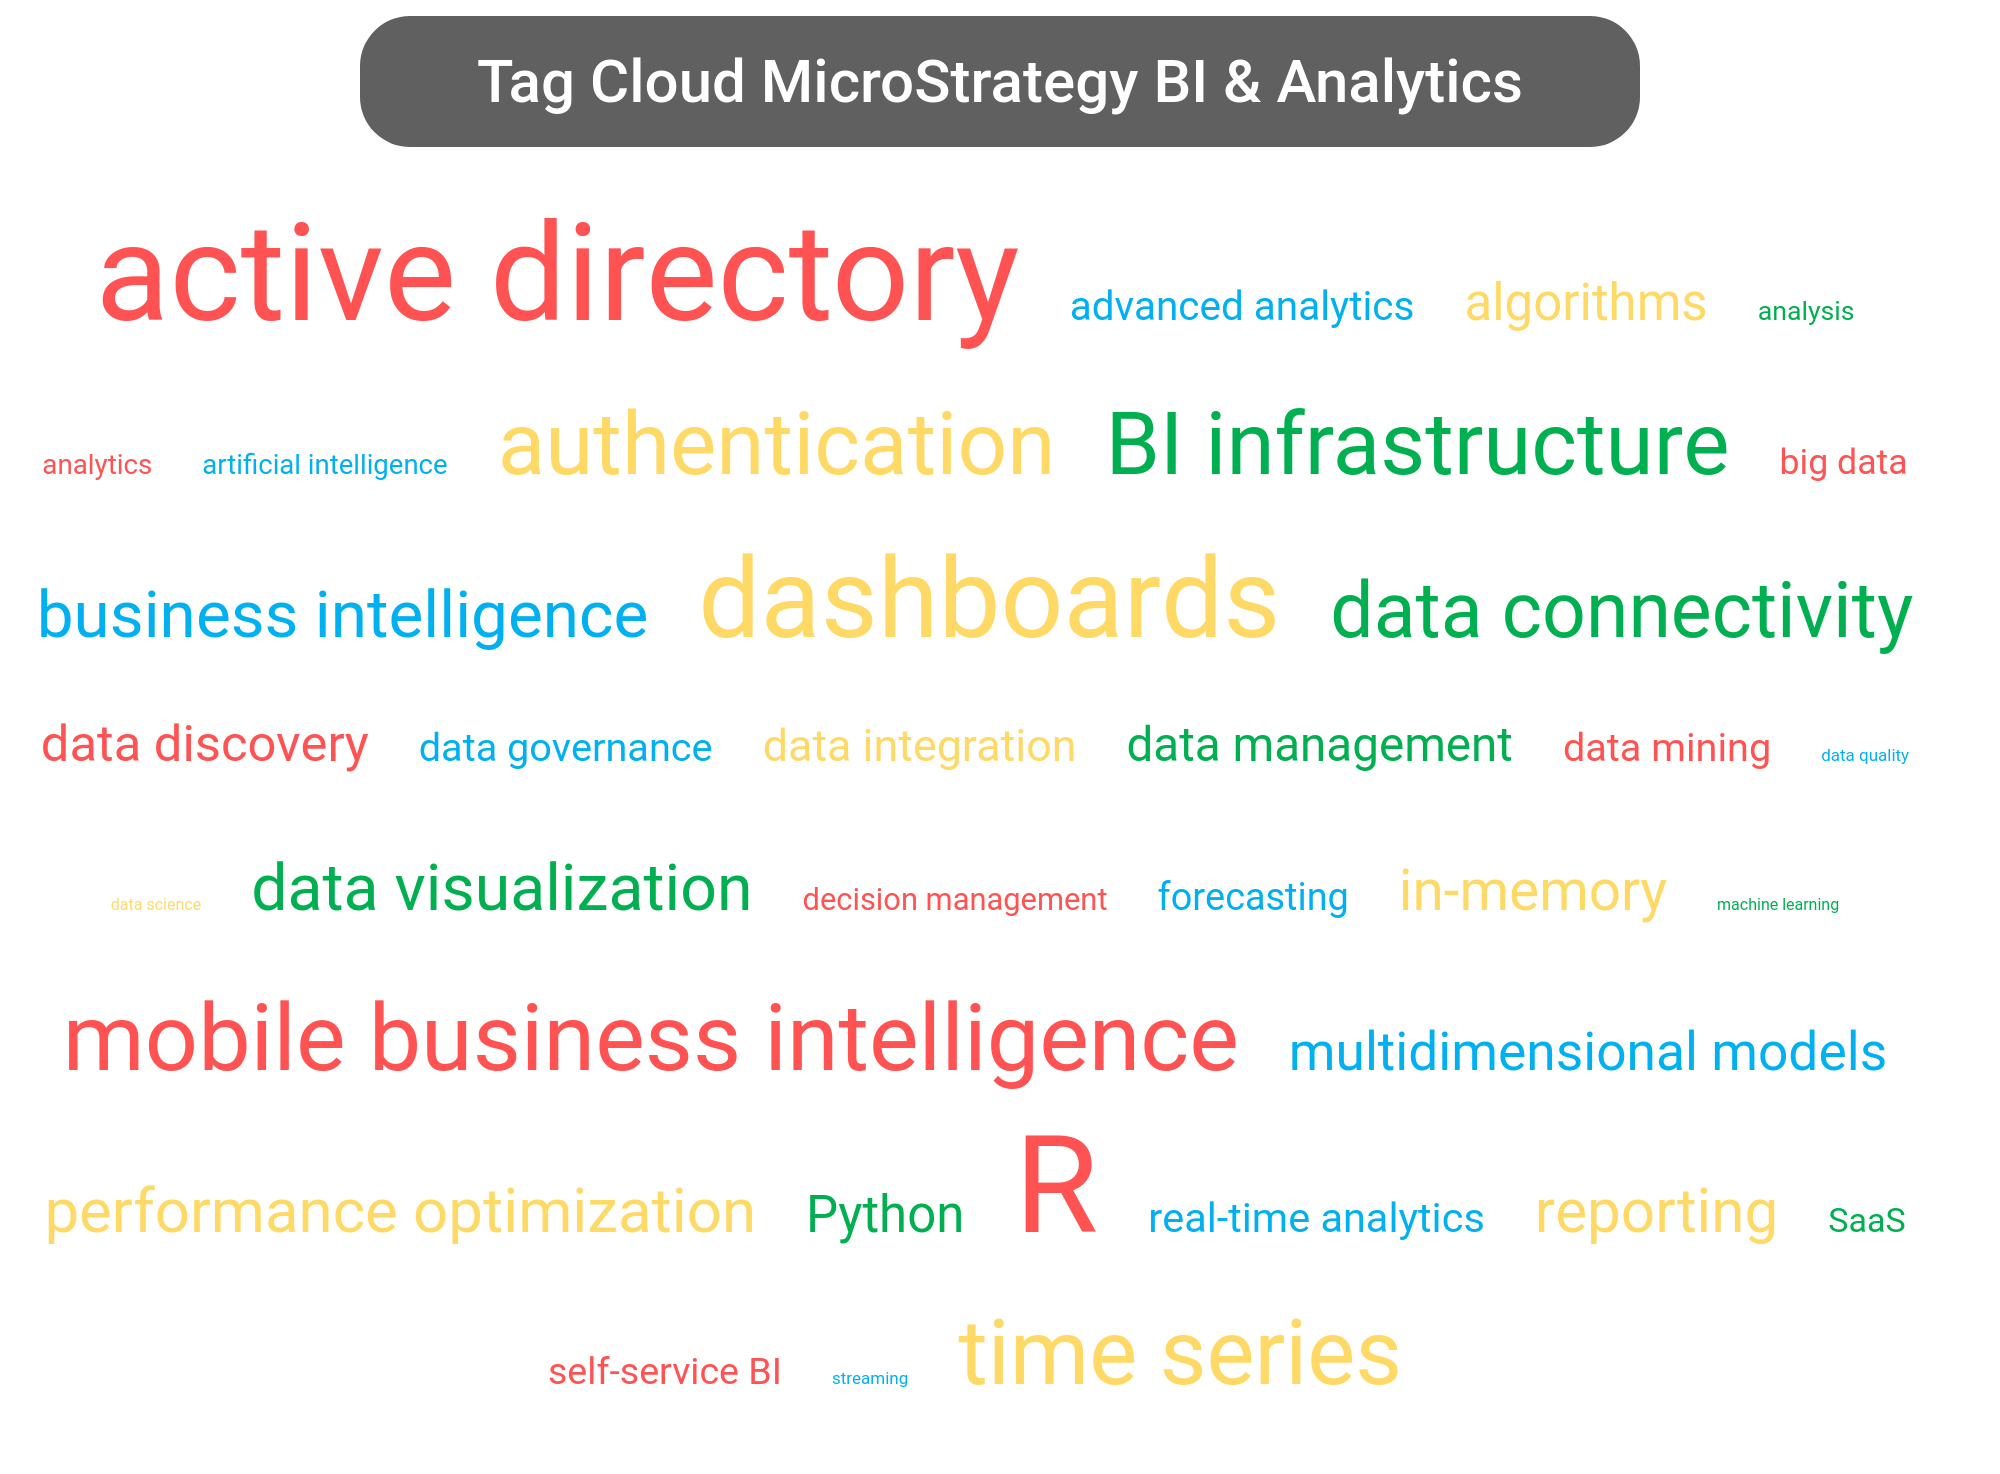 Tag cloud of the MicroStrategy Analytics tools.